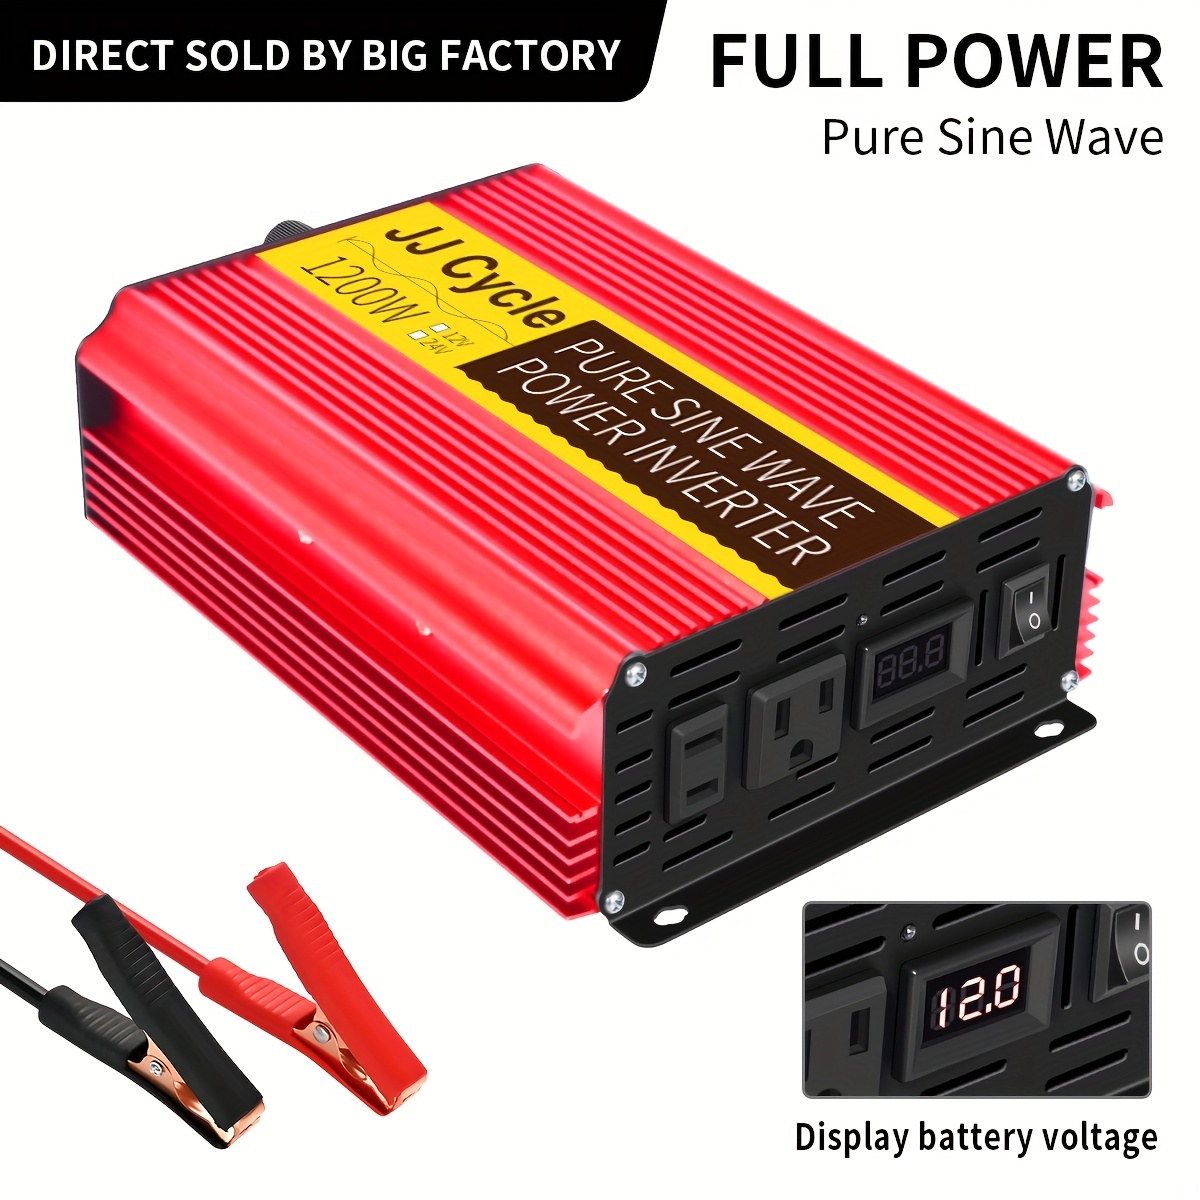 1500W Pure Sine Wave Power Inverter with LED Display DC to AC